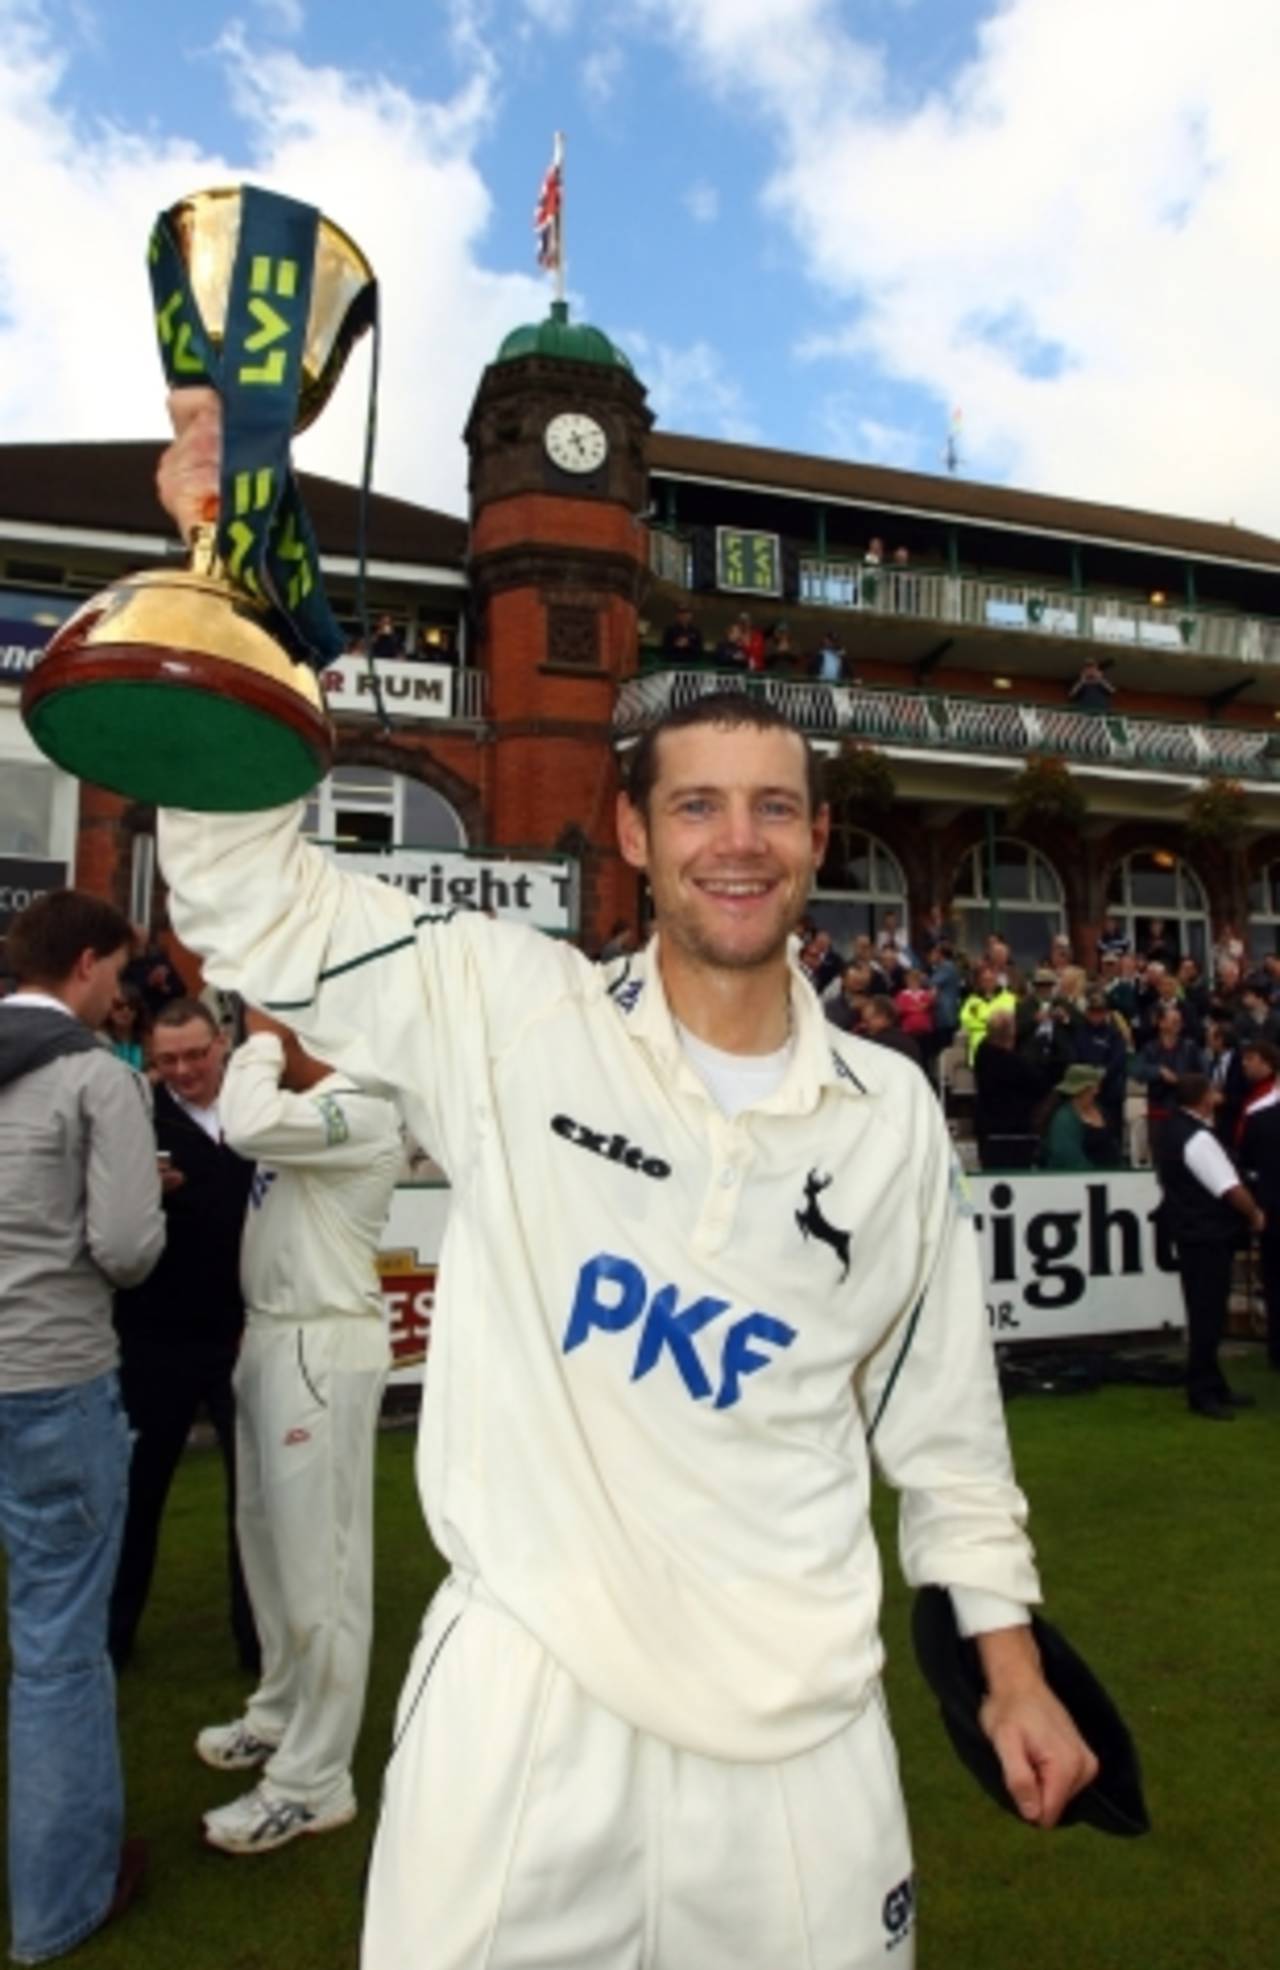 Chris Read led Nottinghamshire for the County Championship title at the end of 2010 season&nbsp;&nbsp;&bull;&nbsp;&nbsp;Getty Images